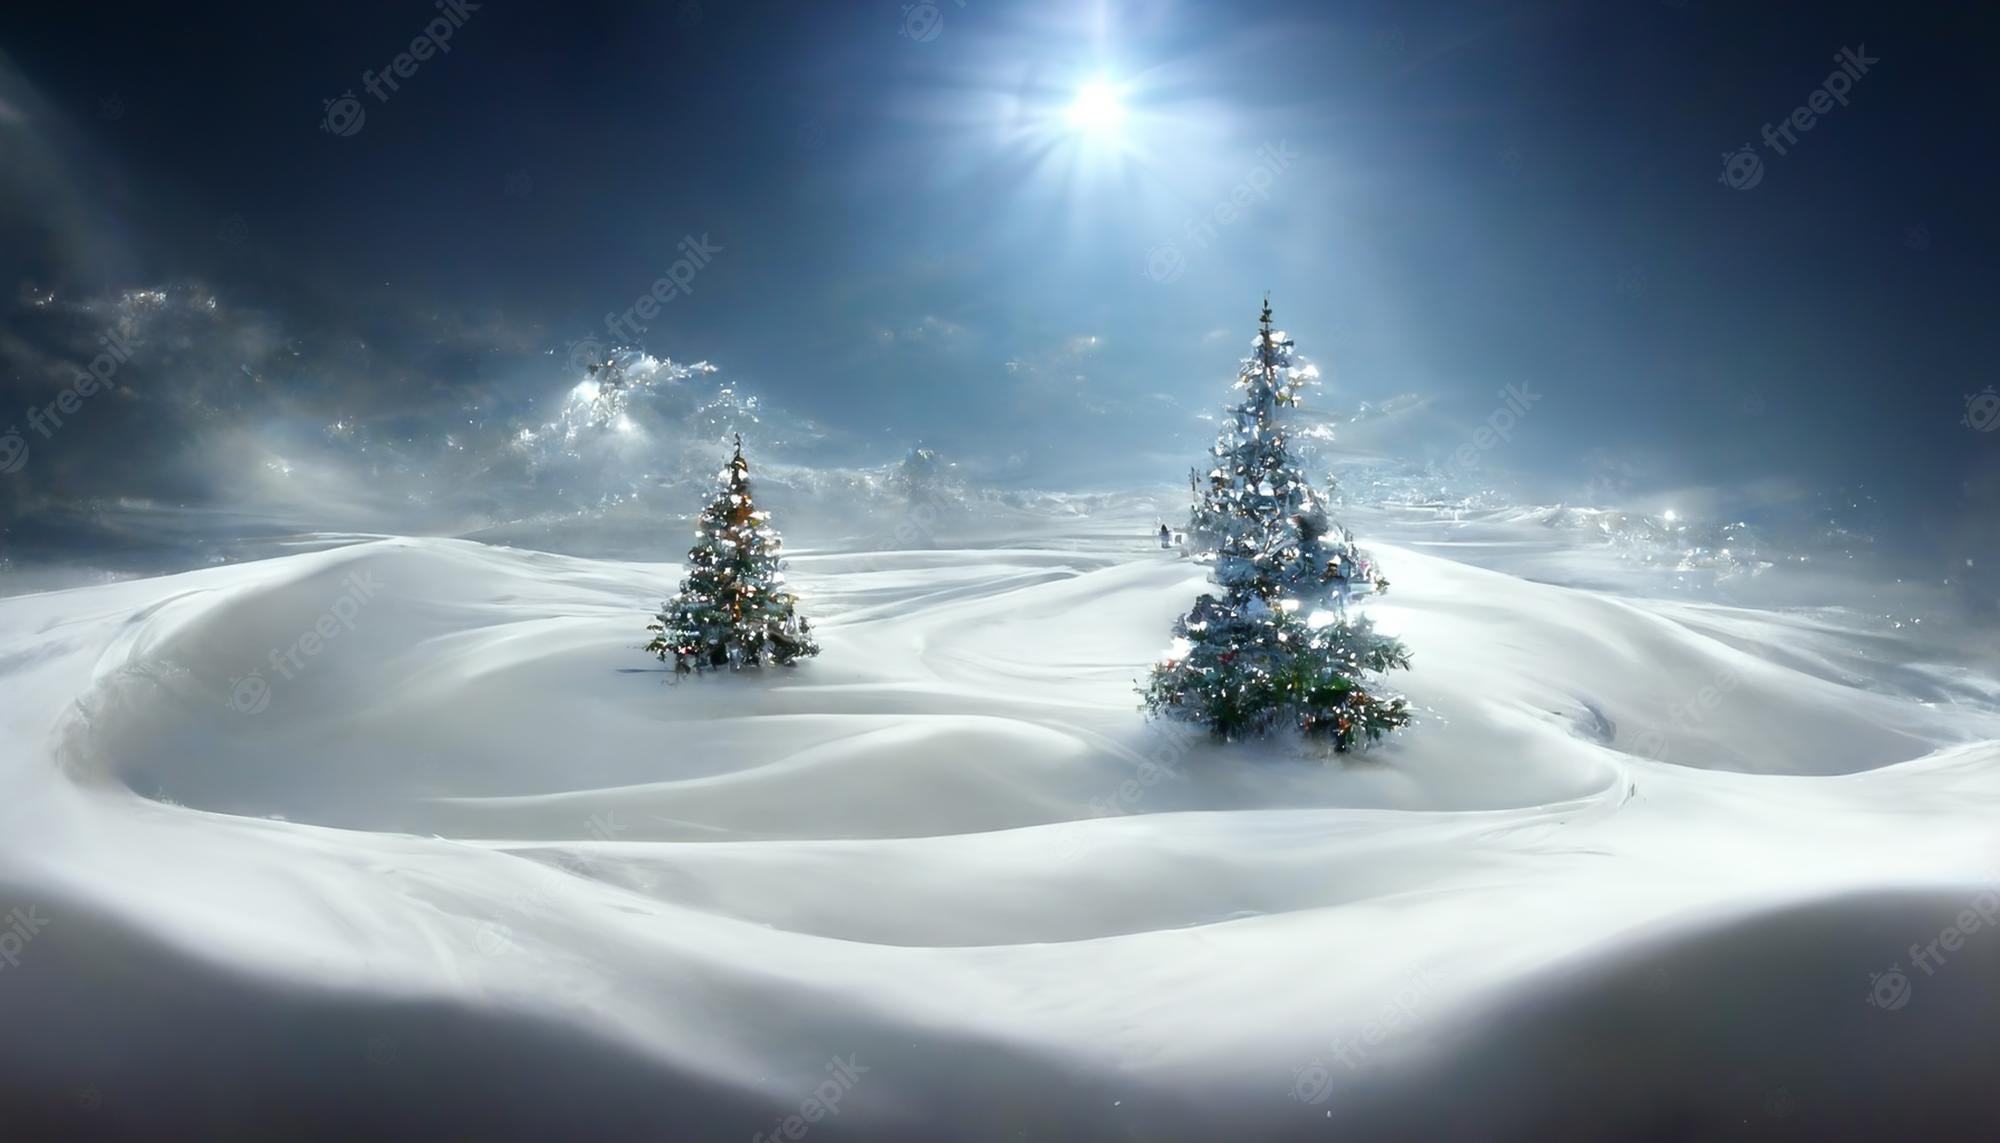 Premium Photo. Christmas HD wallpaper with falling snow beautiful artwork seasonal and copy space background